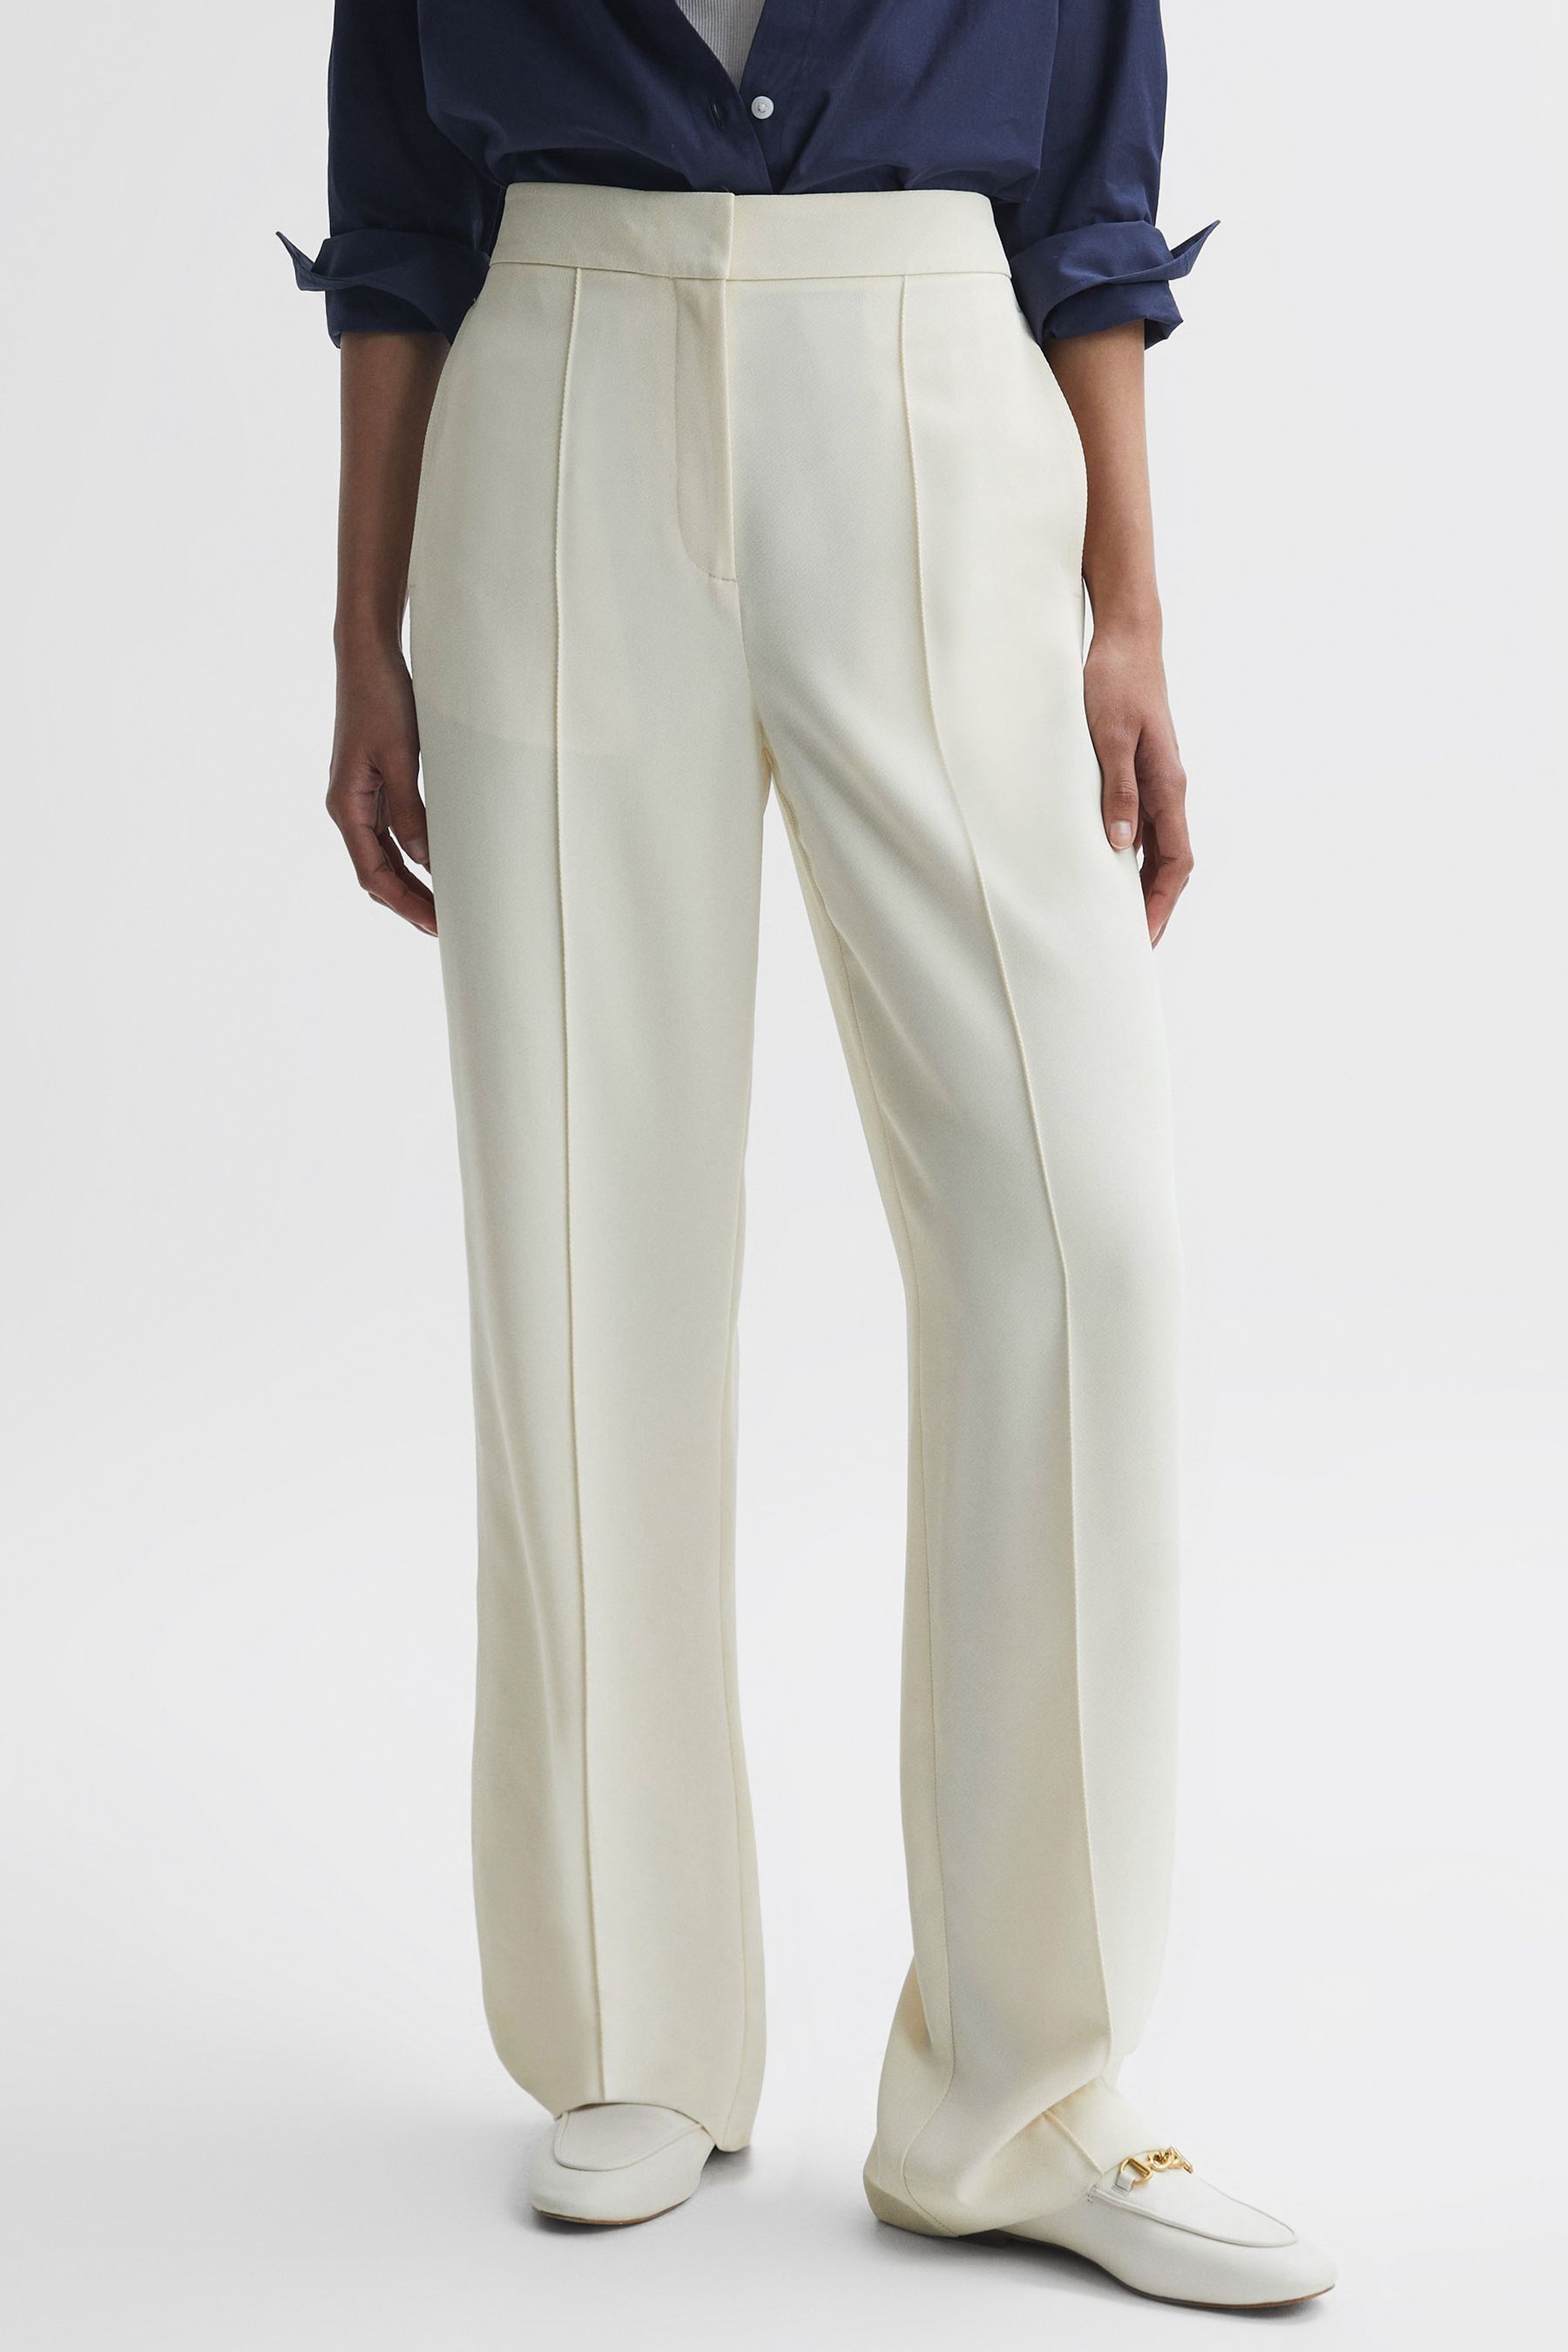 Buy Reiss Cream Aleah Pull On Wide Leg Trousers from the Next UK online ...